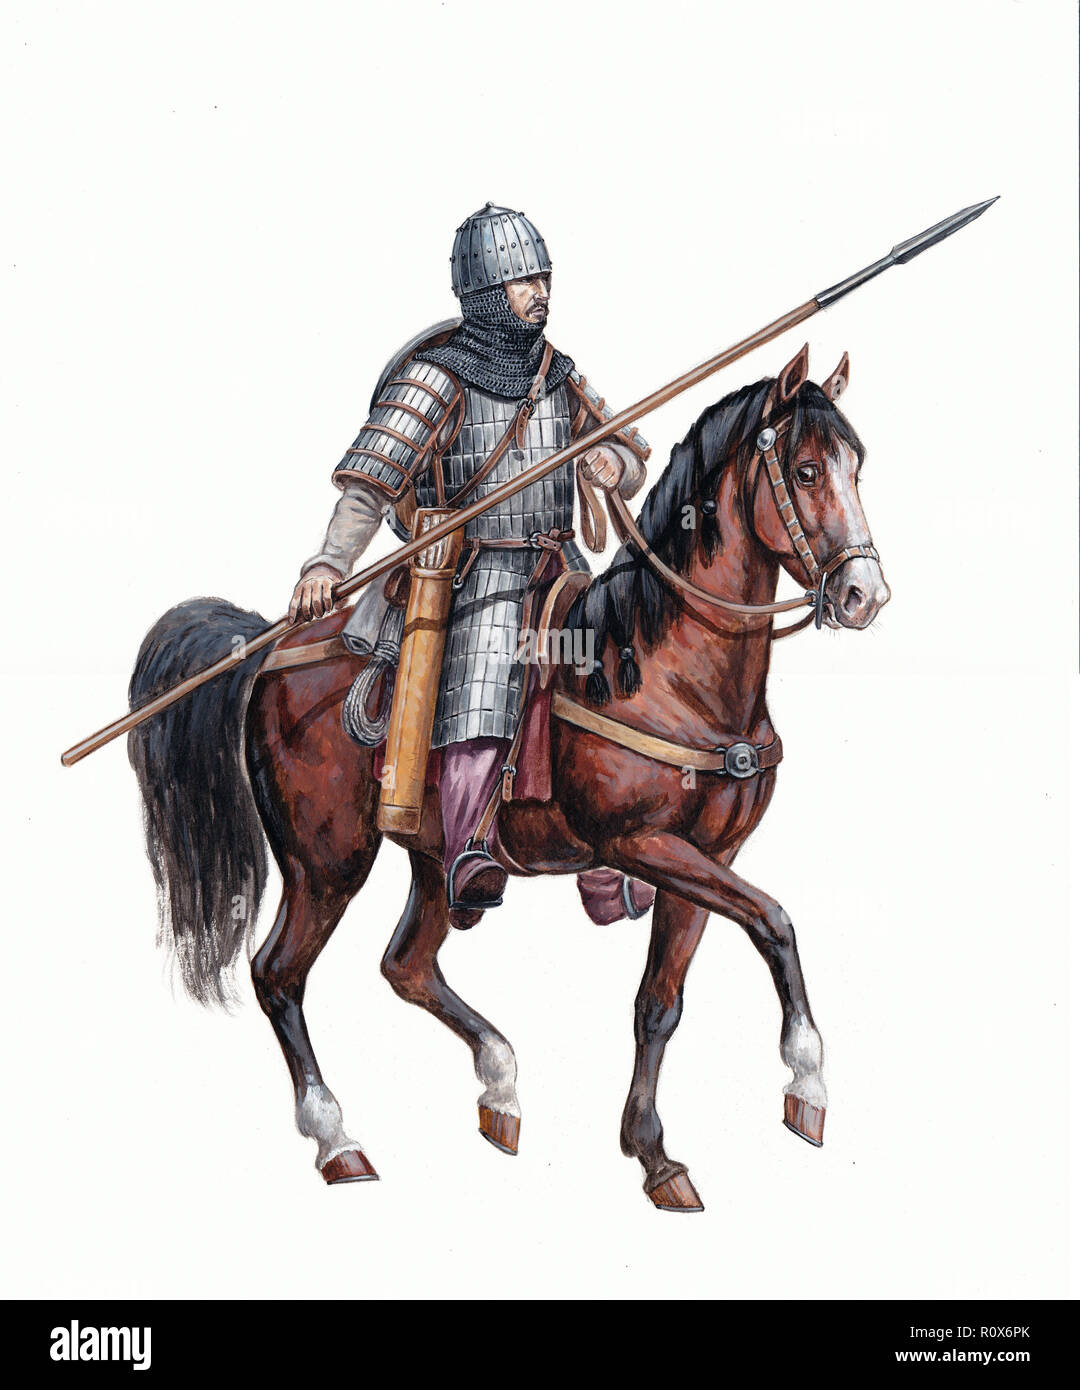 mounted knight middle ages